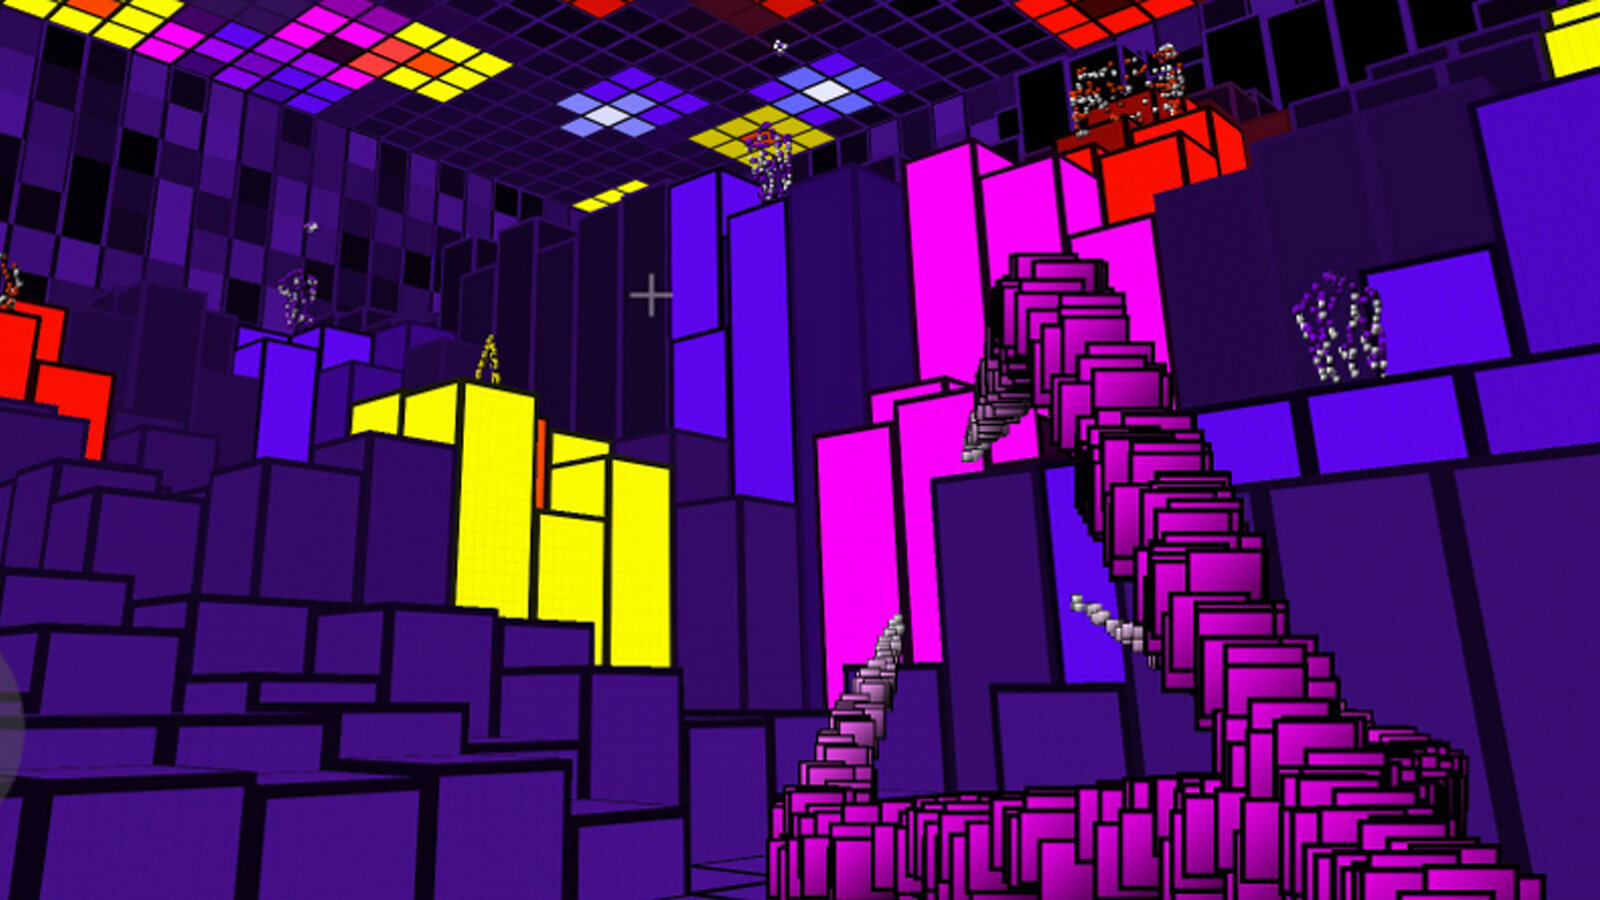 The player aims a claw-like weapon composed of hundreds of cascading purple squares